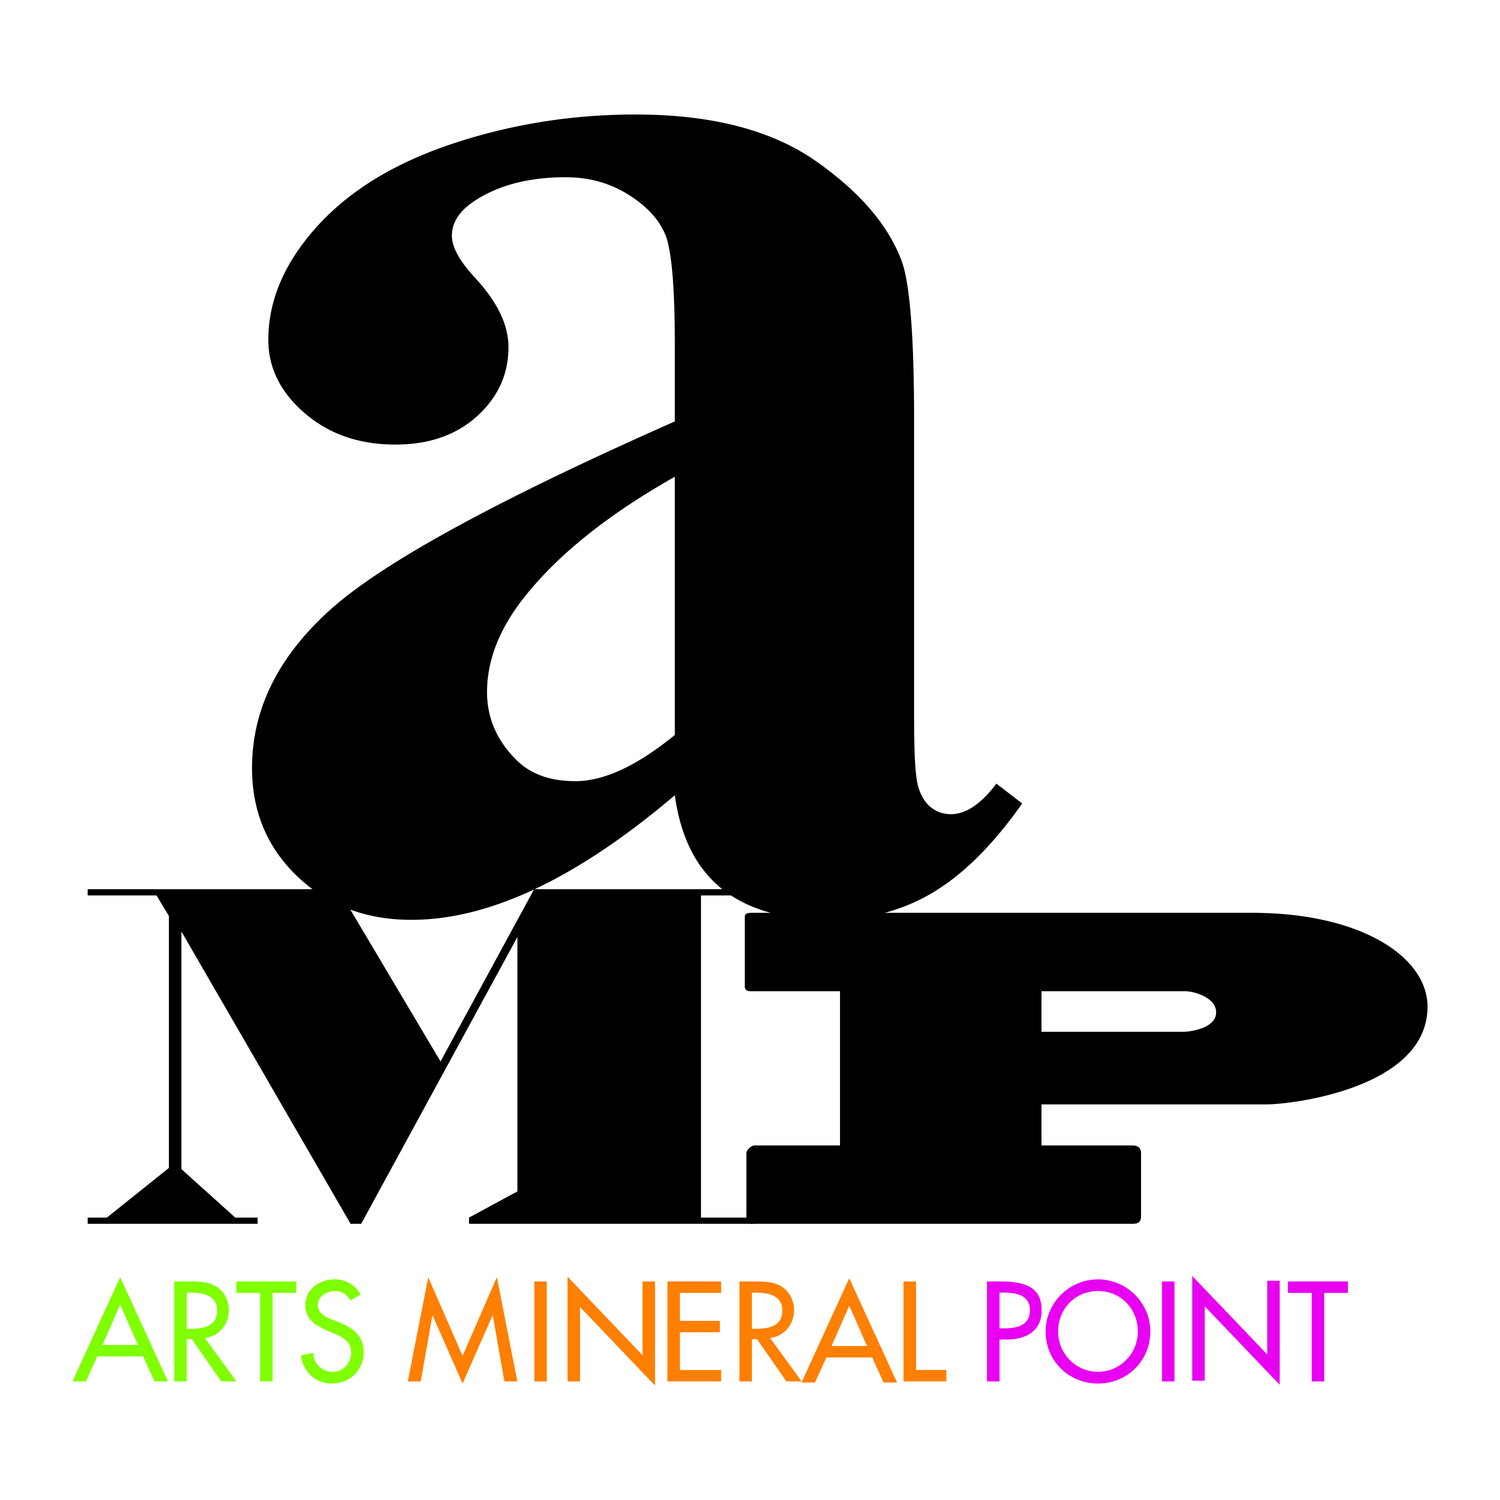 Arts Mineral Point